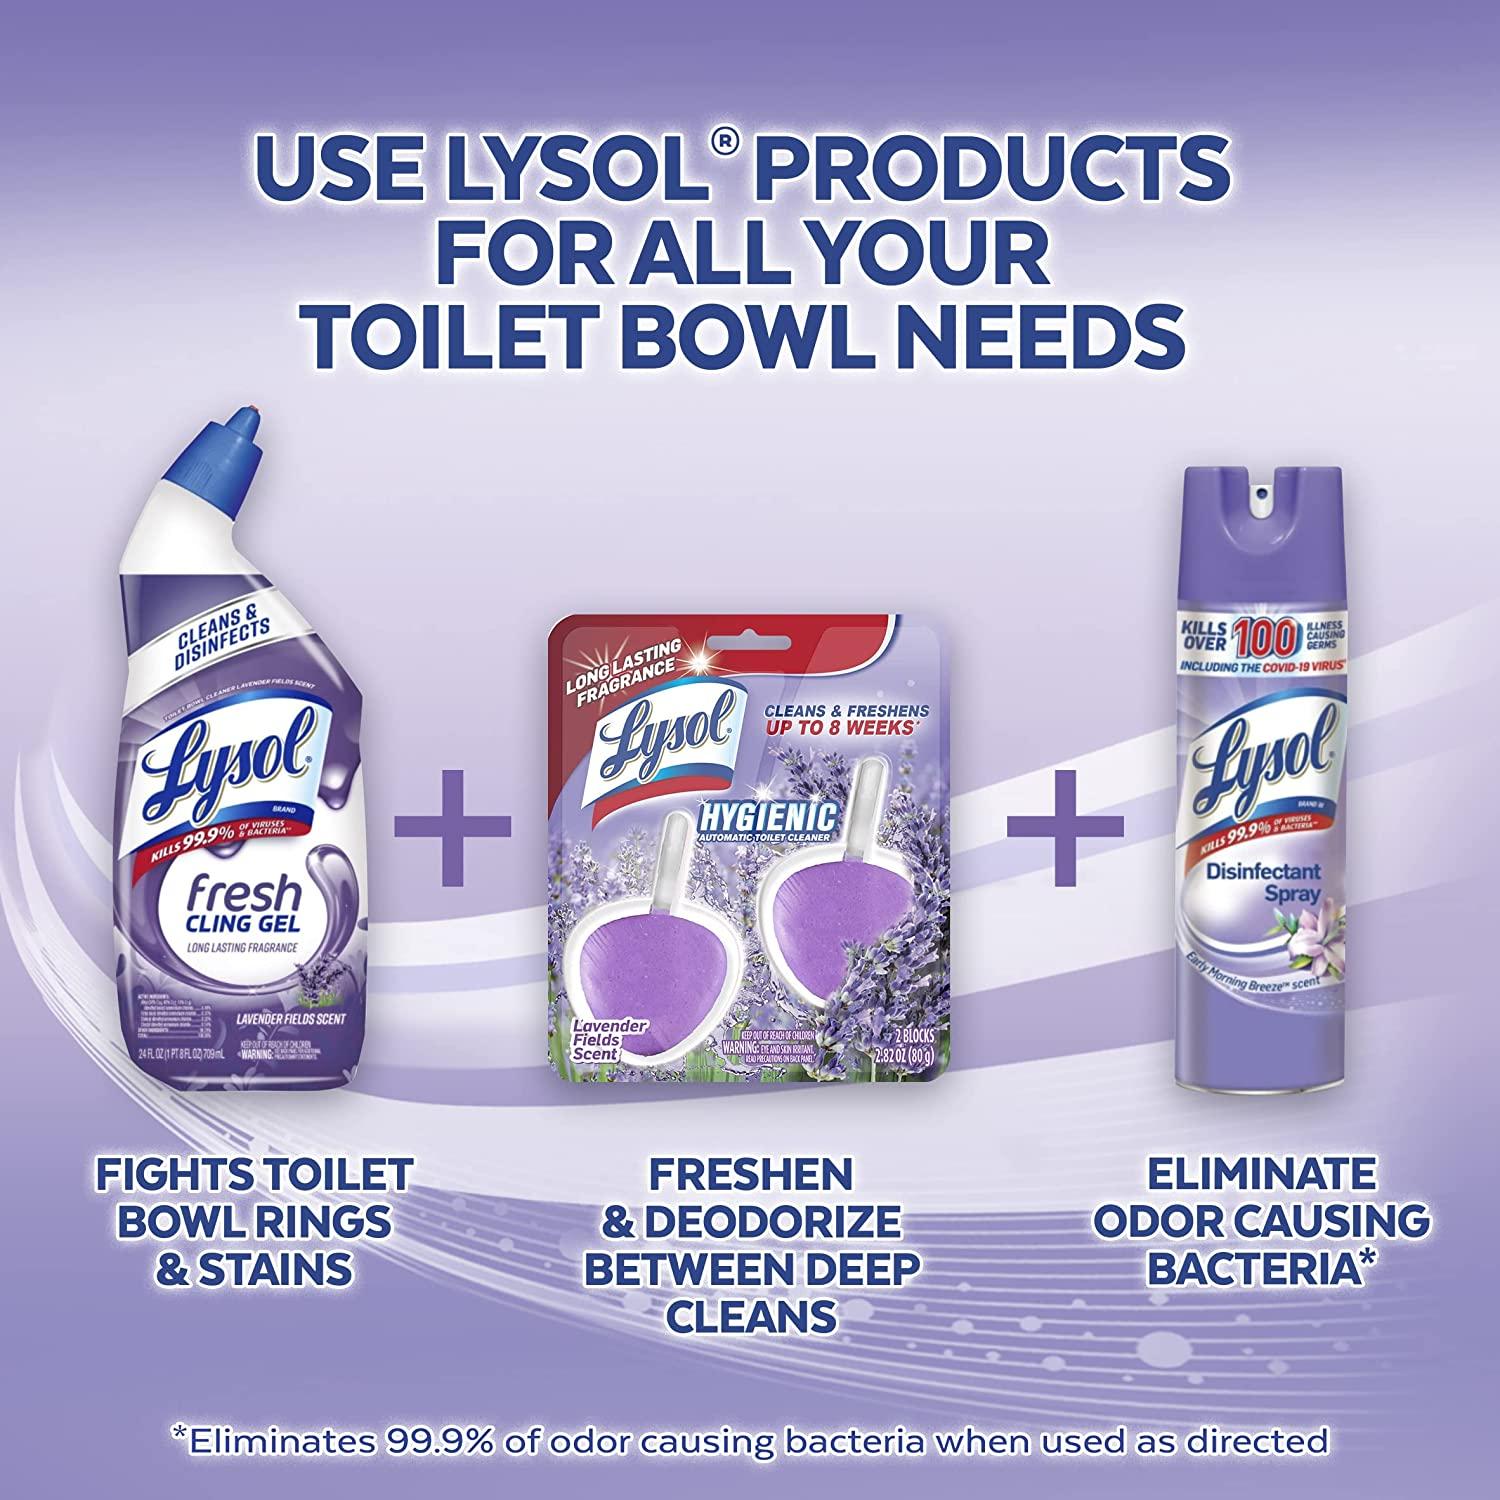 Lysol Automatic In-The-Bowl Toilet Cleaner, Cleans and Freshens Toilet  Bowl, Atlantic Fresh Scent, 2 Count (Pack of 1)